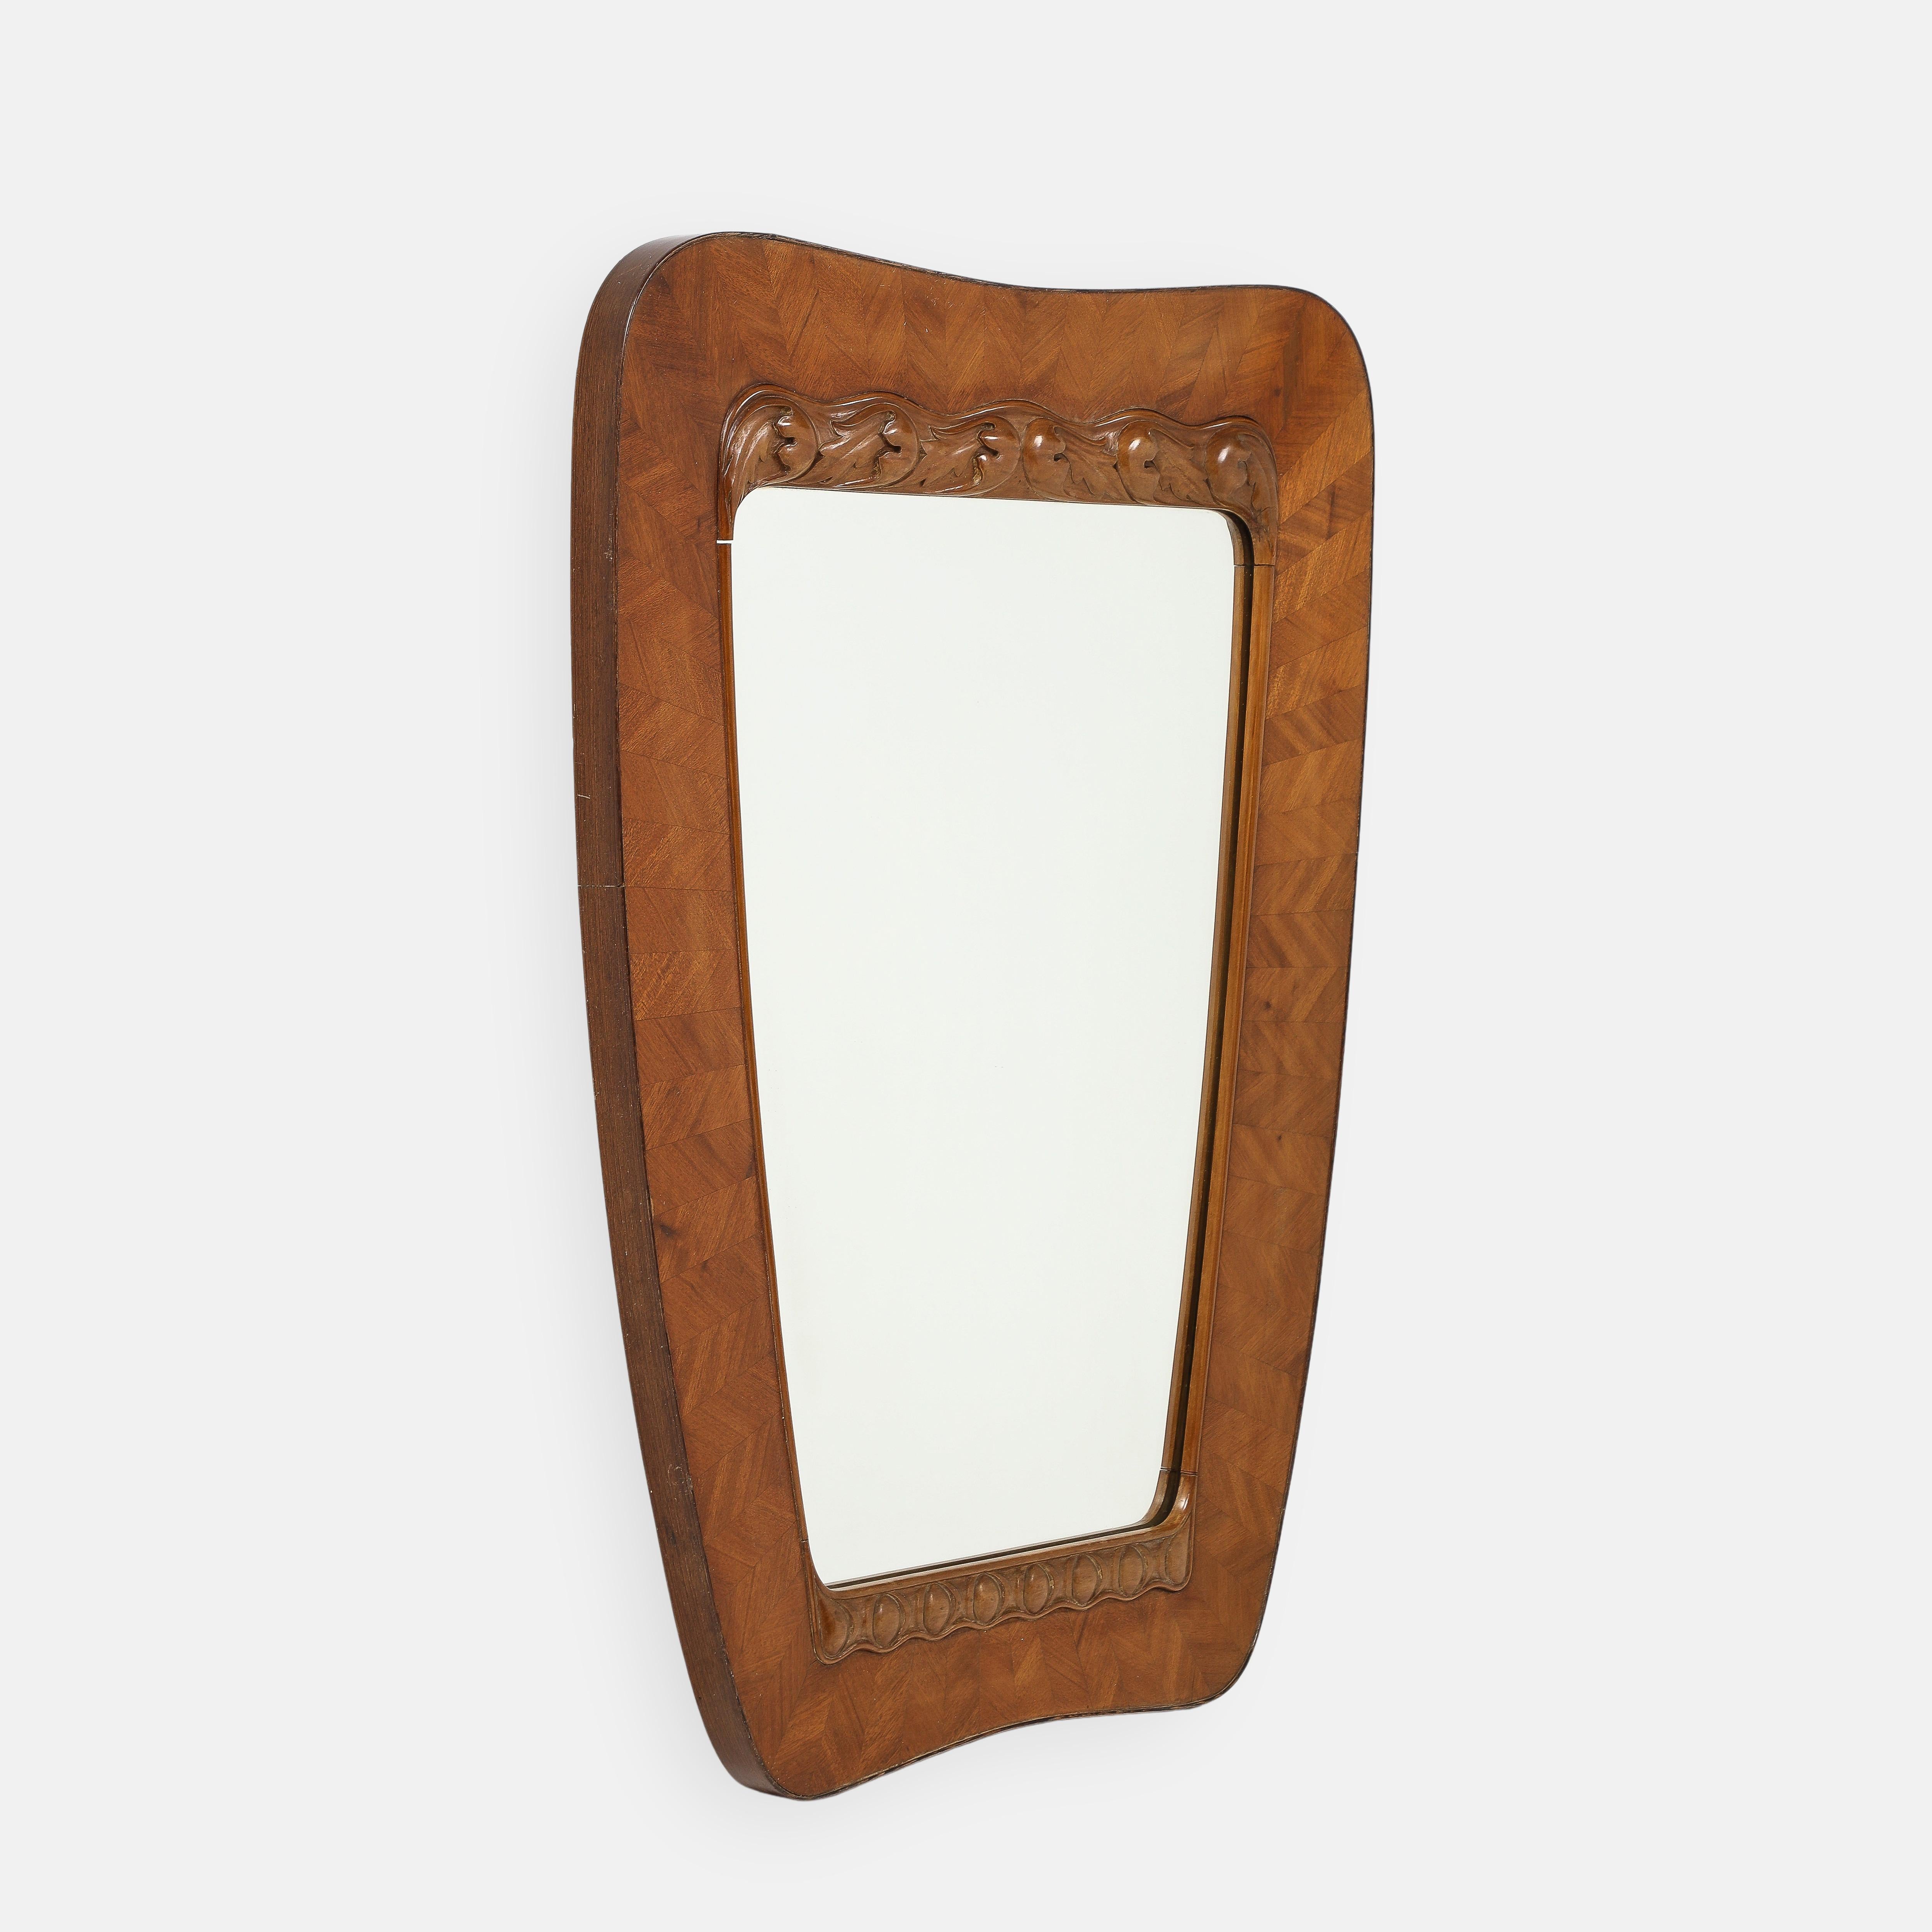 Paolo Buffa designed and executed by cabinetmaker Serafino Arrighi rare walnut radica mirror, Italy, 1930s.  This exquisite hand-crafted artisan mirror is composed of a frame in radica walnut parquet with gorgeous hand-carved decorative naturalistic